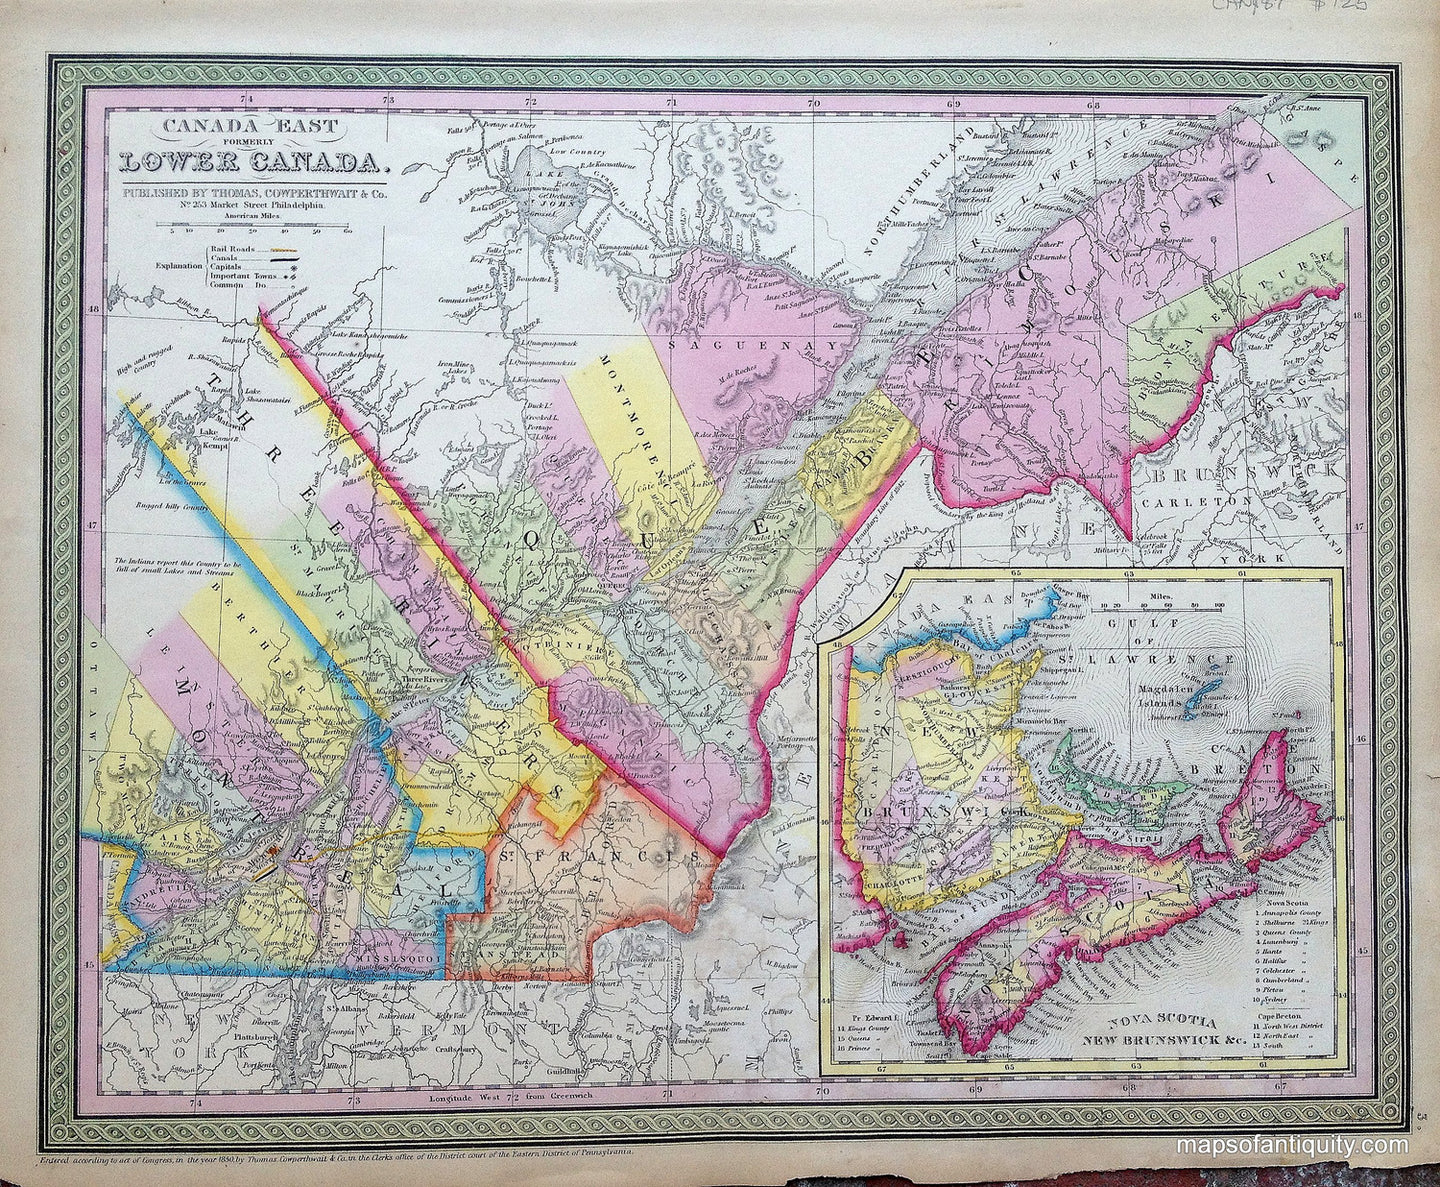 Antique-Hand-Colored-Map-Canada-East-Formerly-Lower-Canada.-**********-North-America-Canada-1850-Mitchell/Cowperthwait-Desilver-&-Butler-Maps-Of-Antiquity